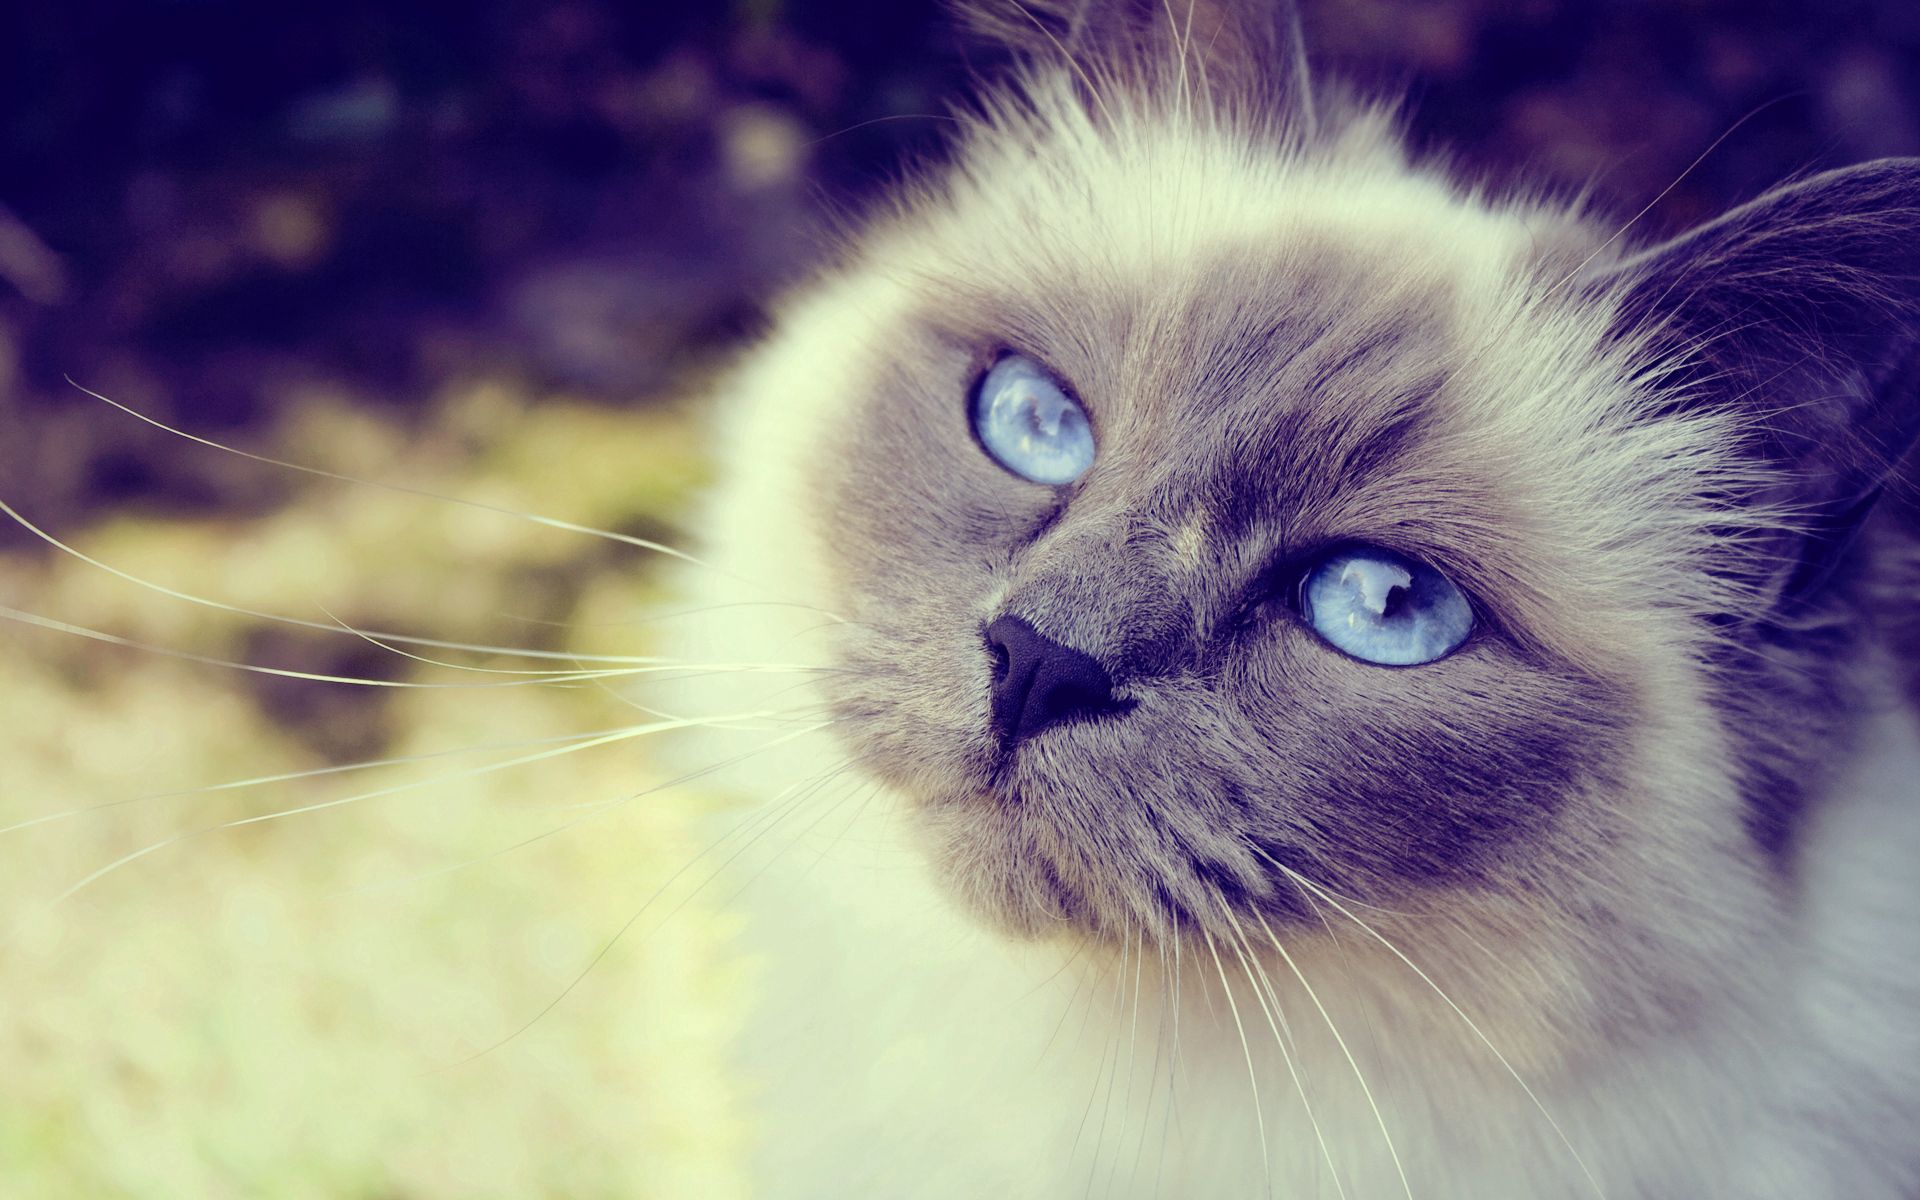 animals, cat, fluffy, muzzle, spotted, spotty, close up, blue eyed Phone Background